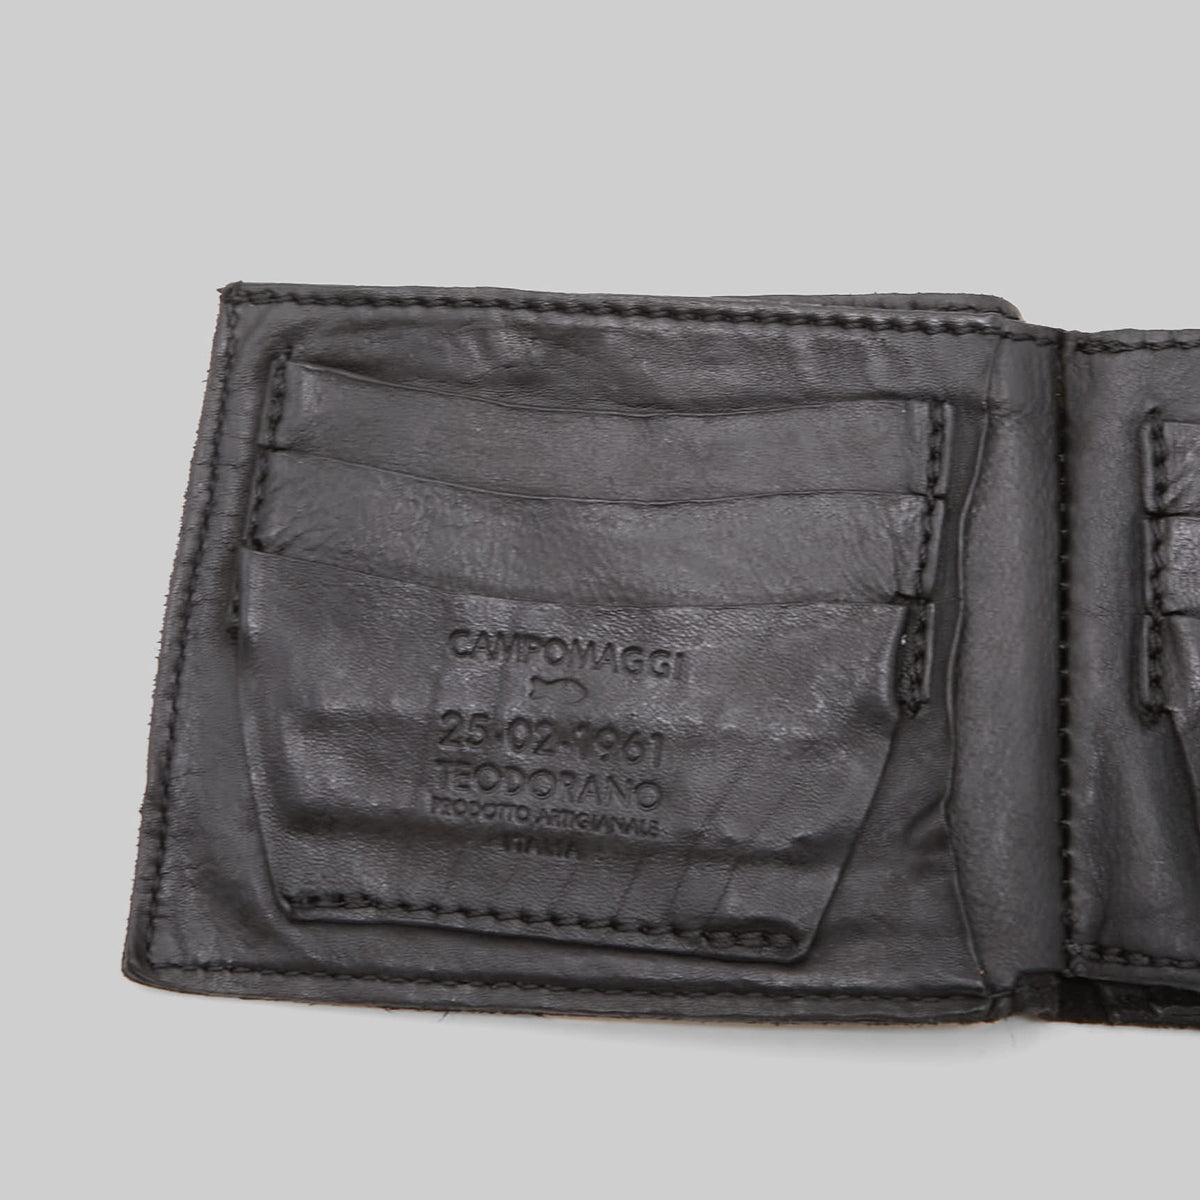 Campomaggi Horizontal Wallet with Coin Compartment